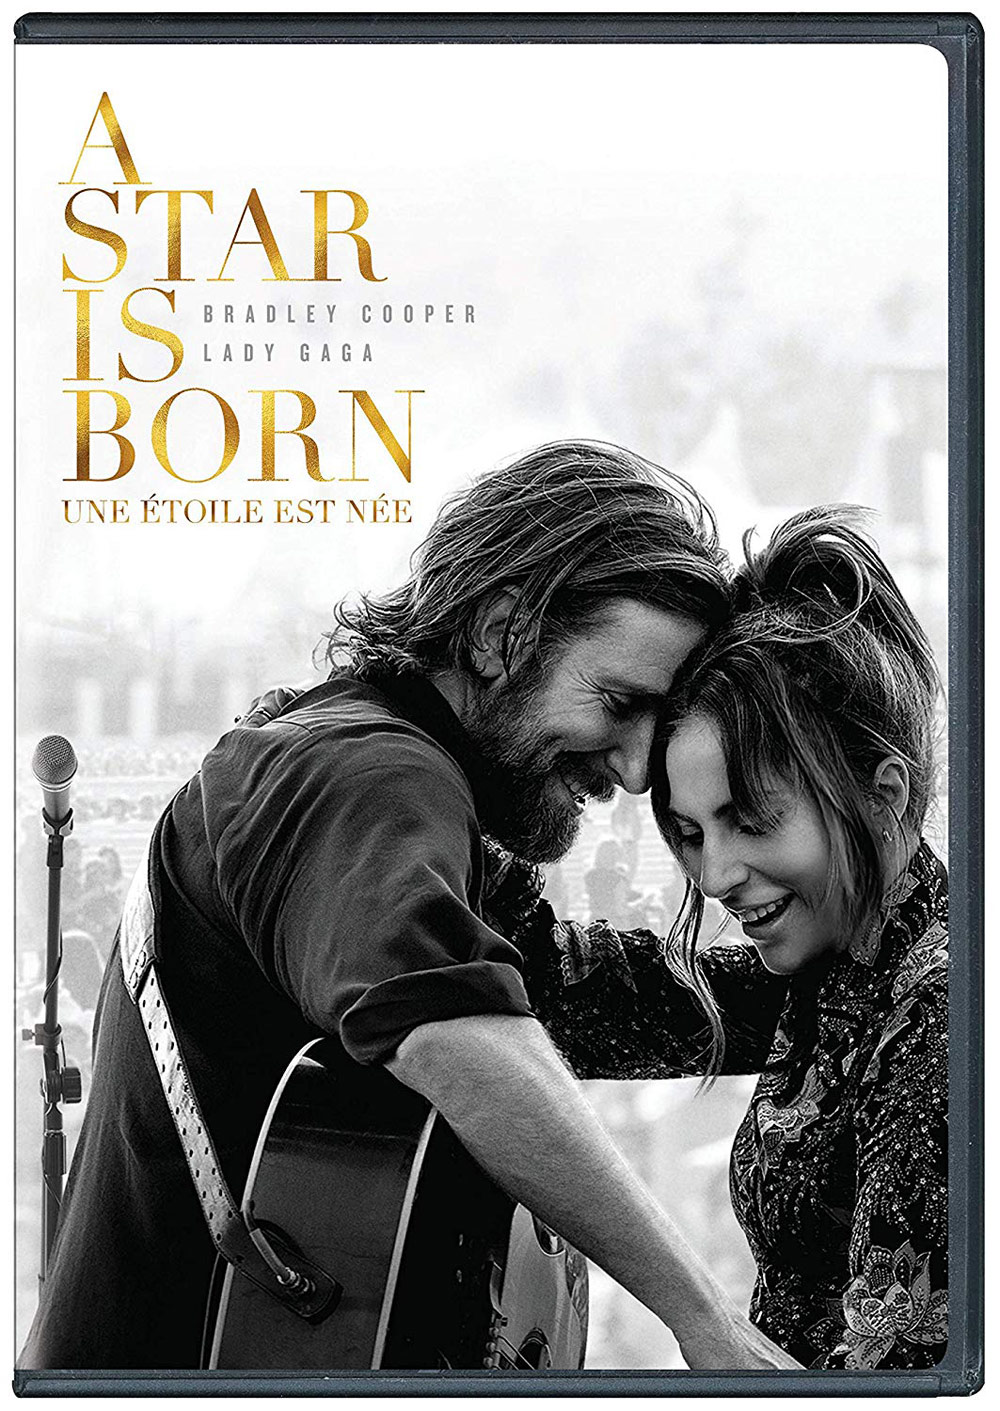 A Star is Born on DVD